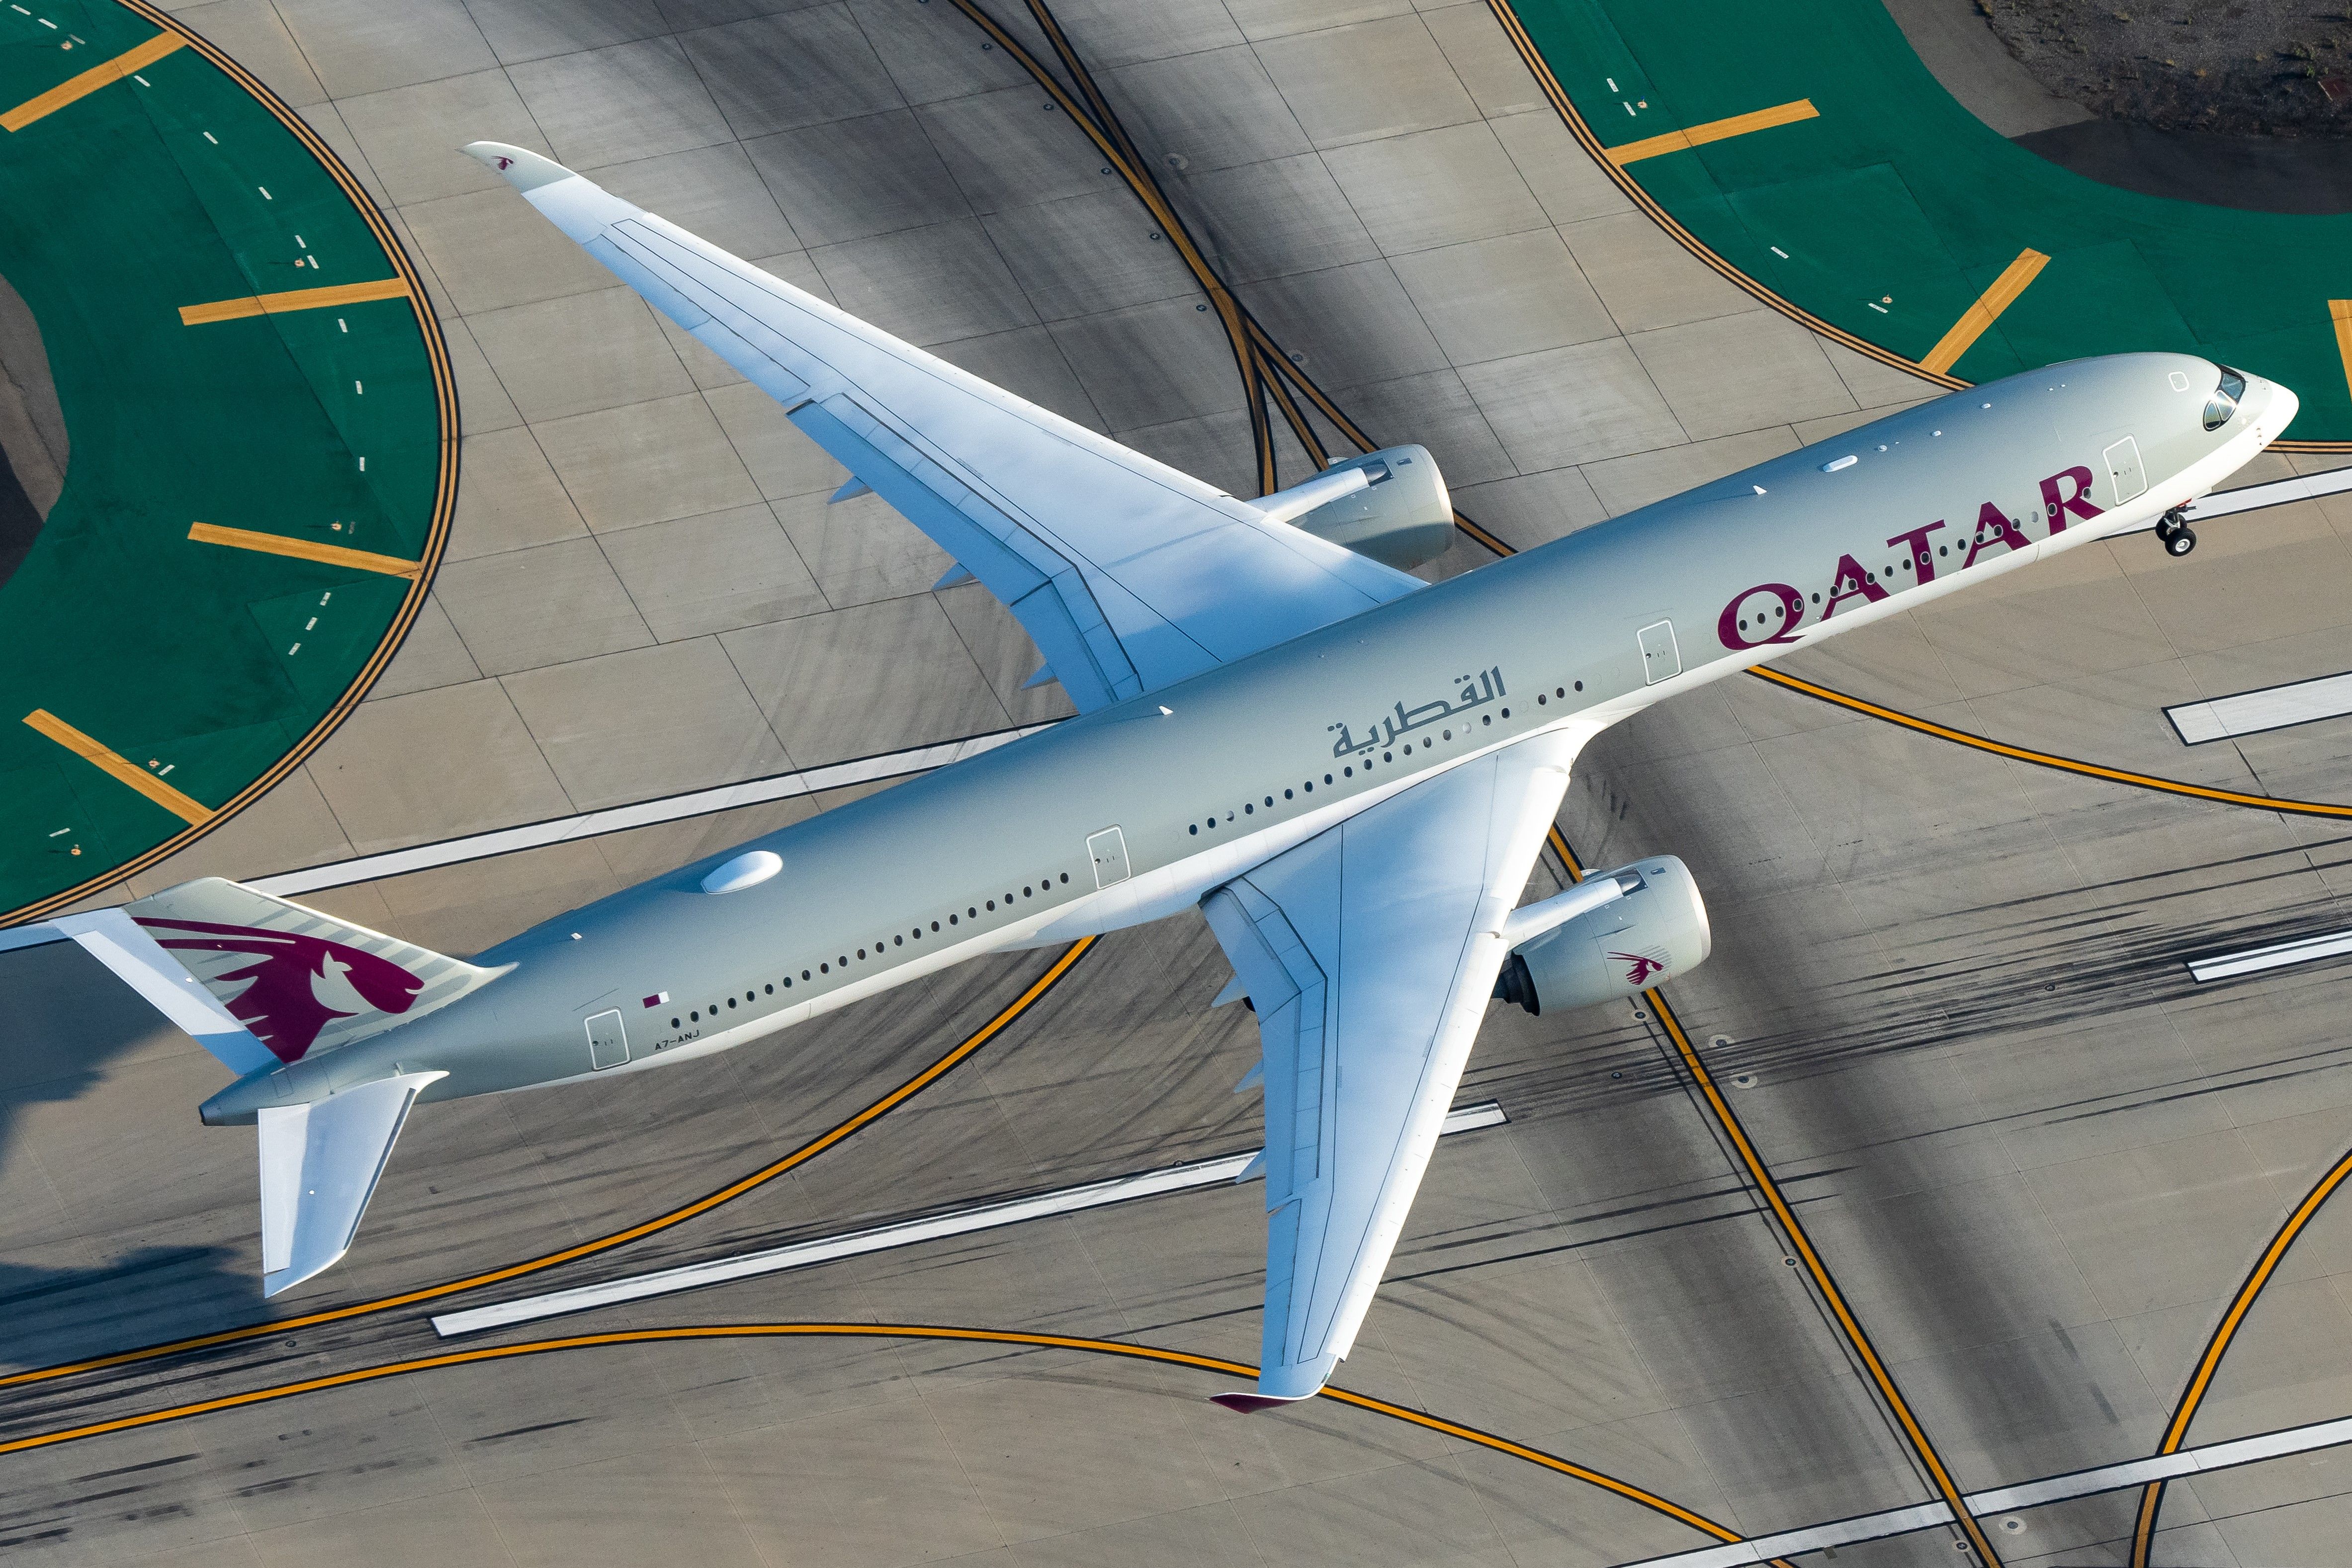 A Qatar Airways Airbus A350-1041 just after taking off.